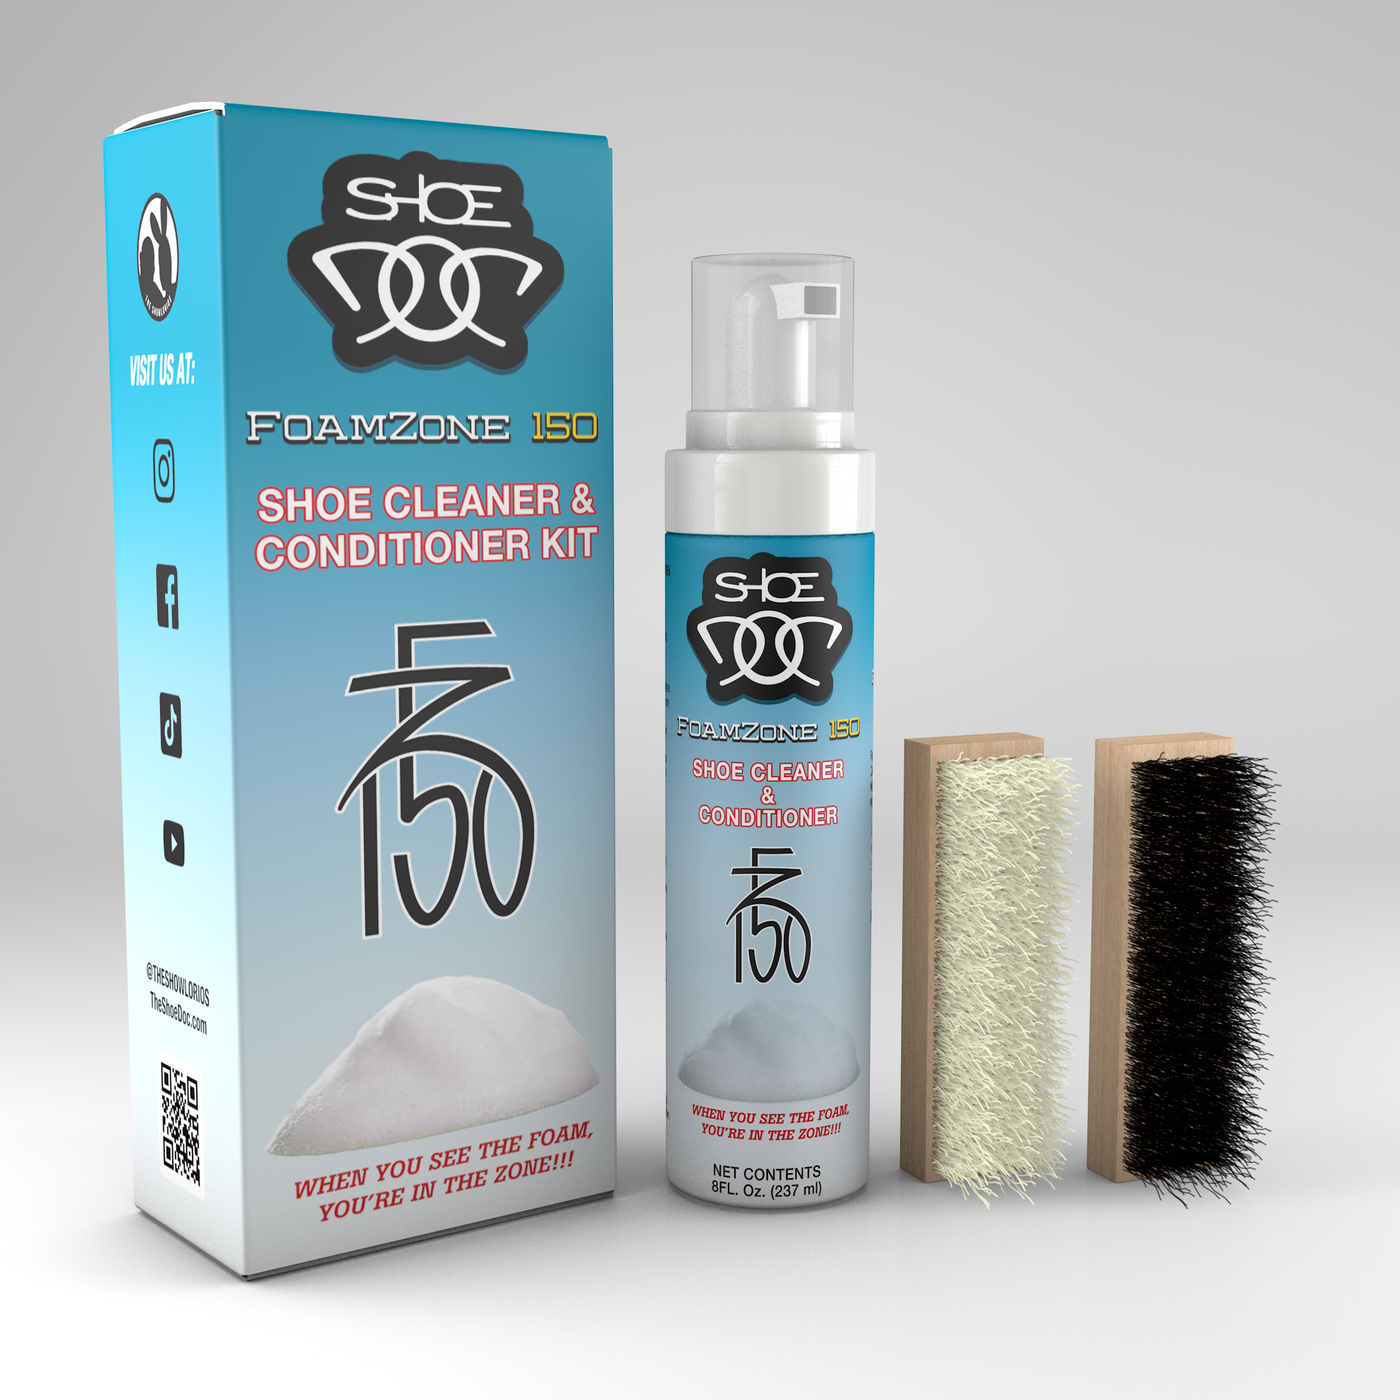 Buy Magic Foam Cleaner Online at Best Price in India on